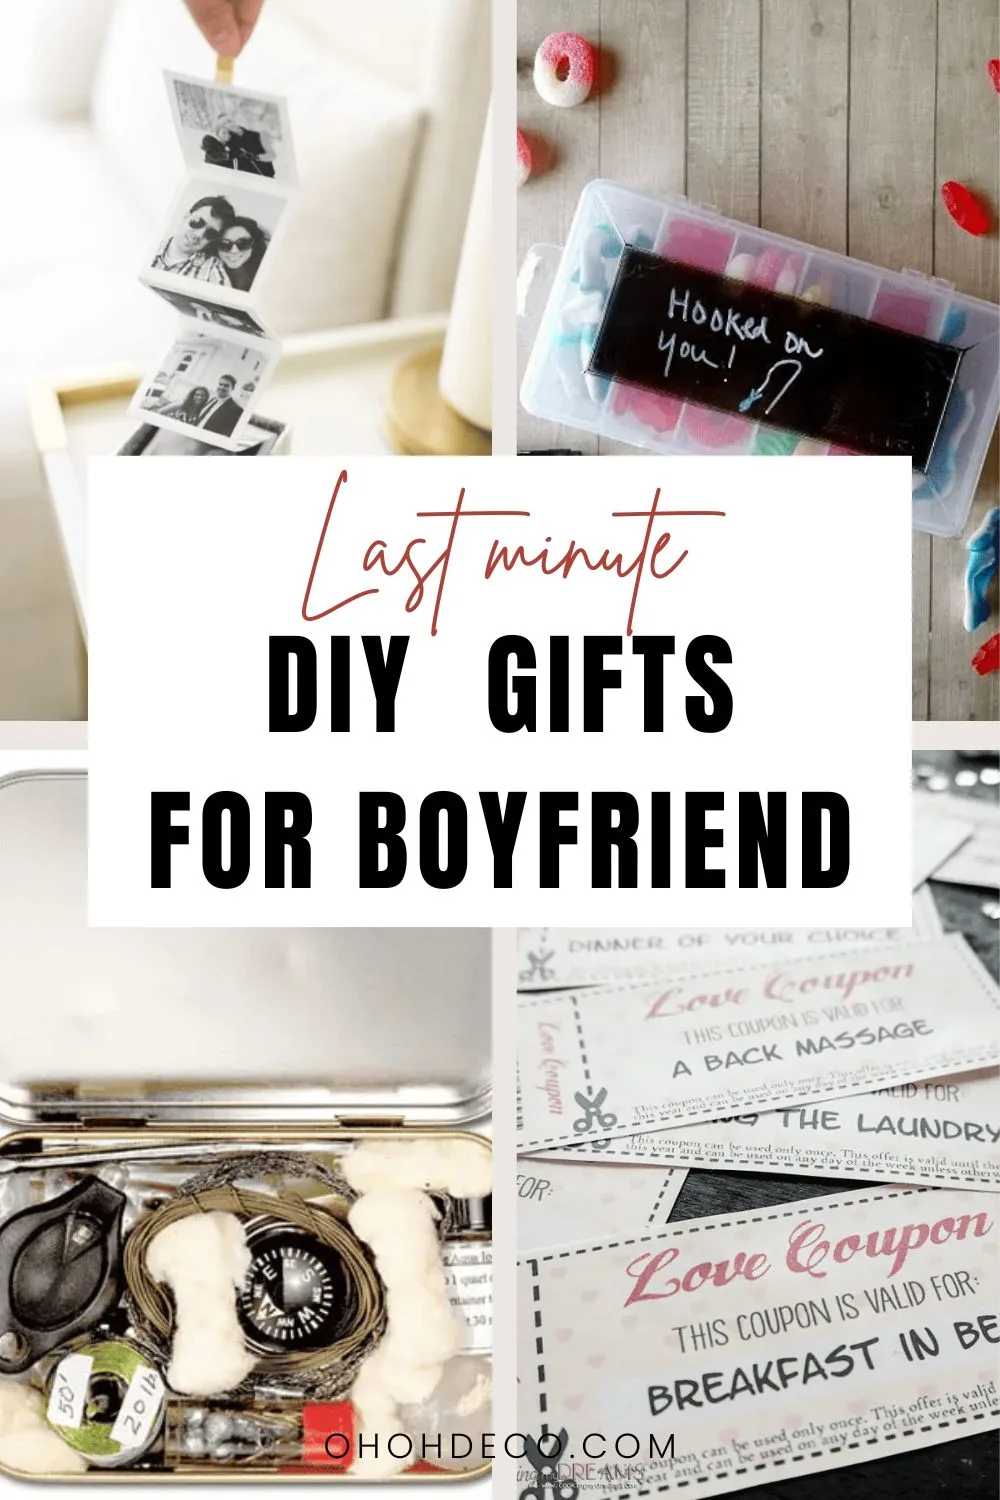 230 Gift Boxes ideas | gifts, diy gifts, gift baskets